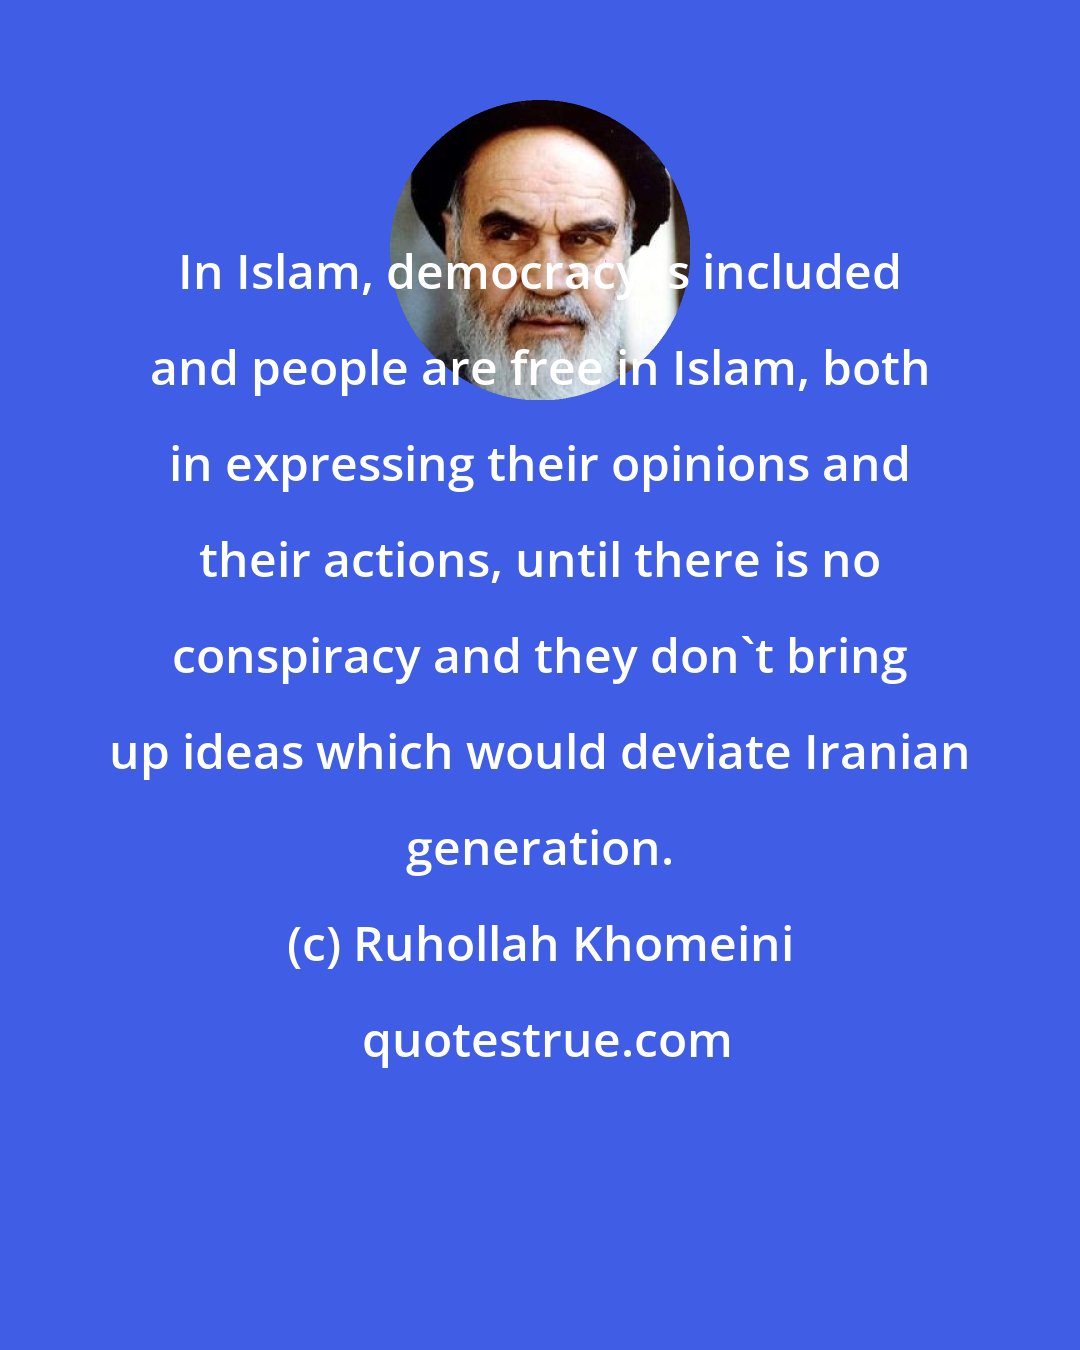 Ruhollah Khomeini: In Islam, democracy is included and people are free in Islam, both in expressing their opinions and their actions, until there is no conspiracy and they don't bring up ideas which would deviate Iranian generation.